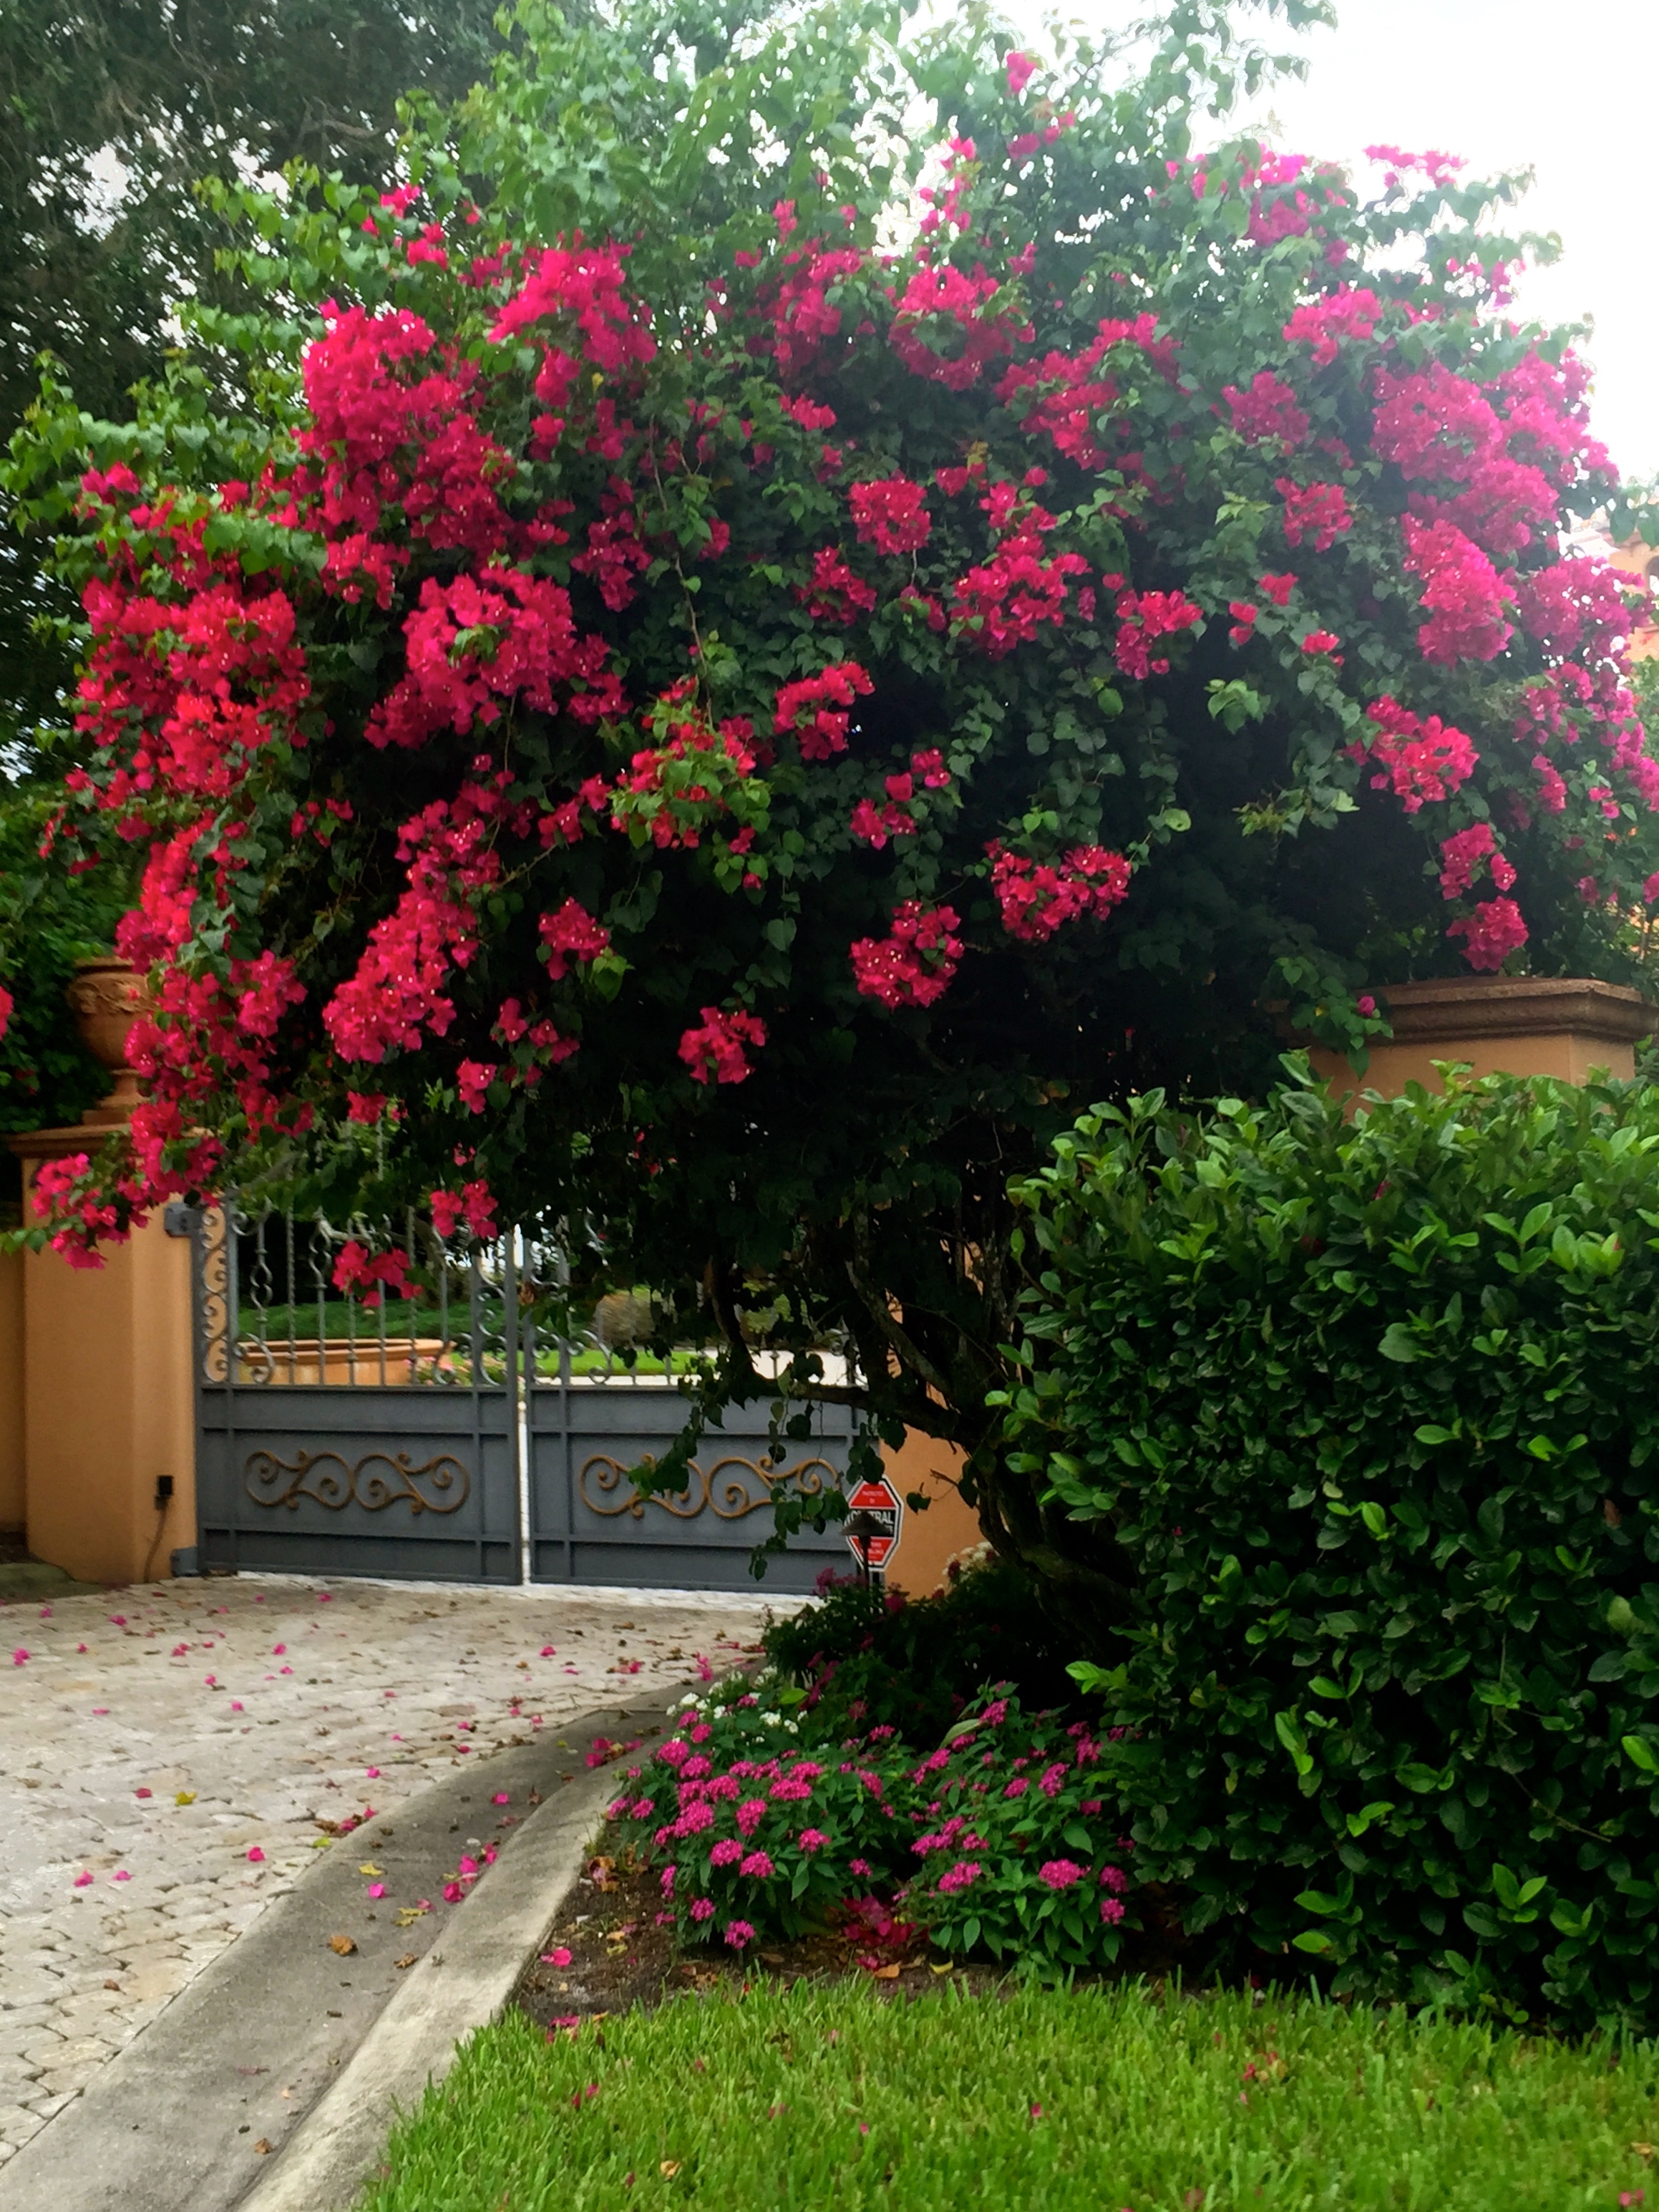 Florida bougainvillea by The Potted Boxwood. 2